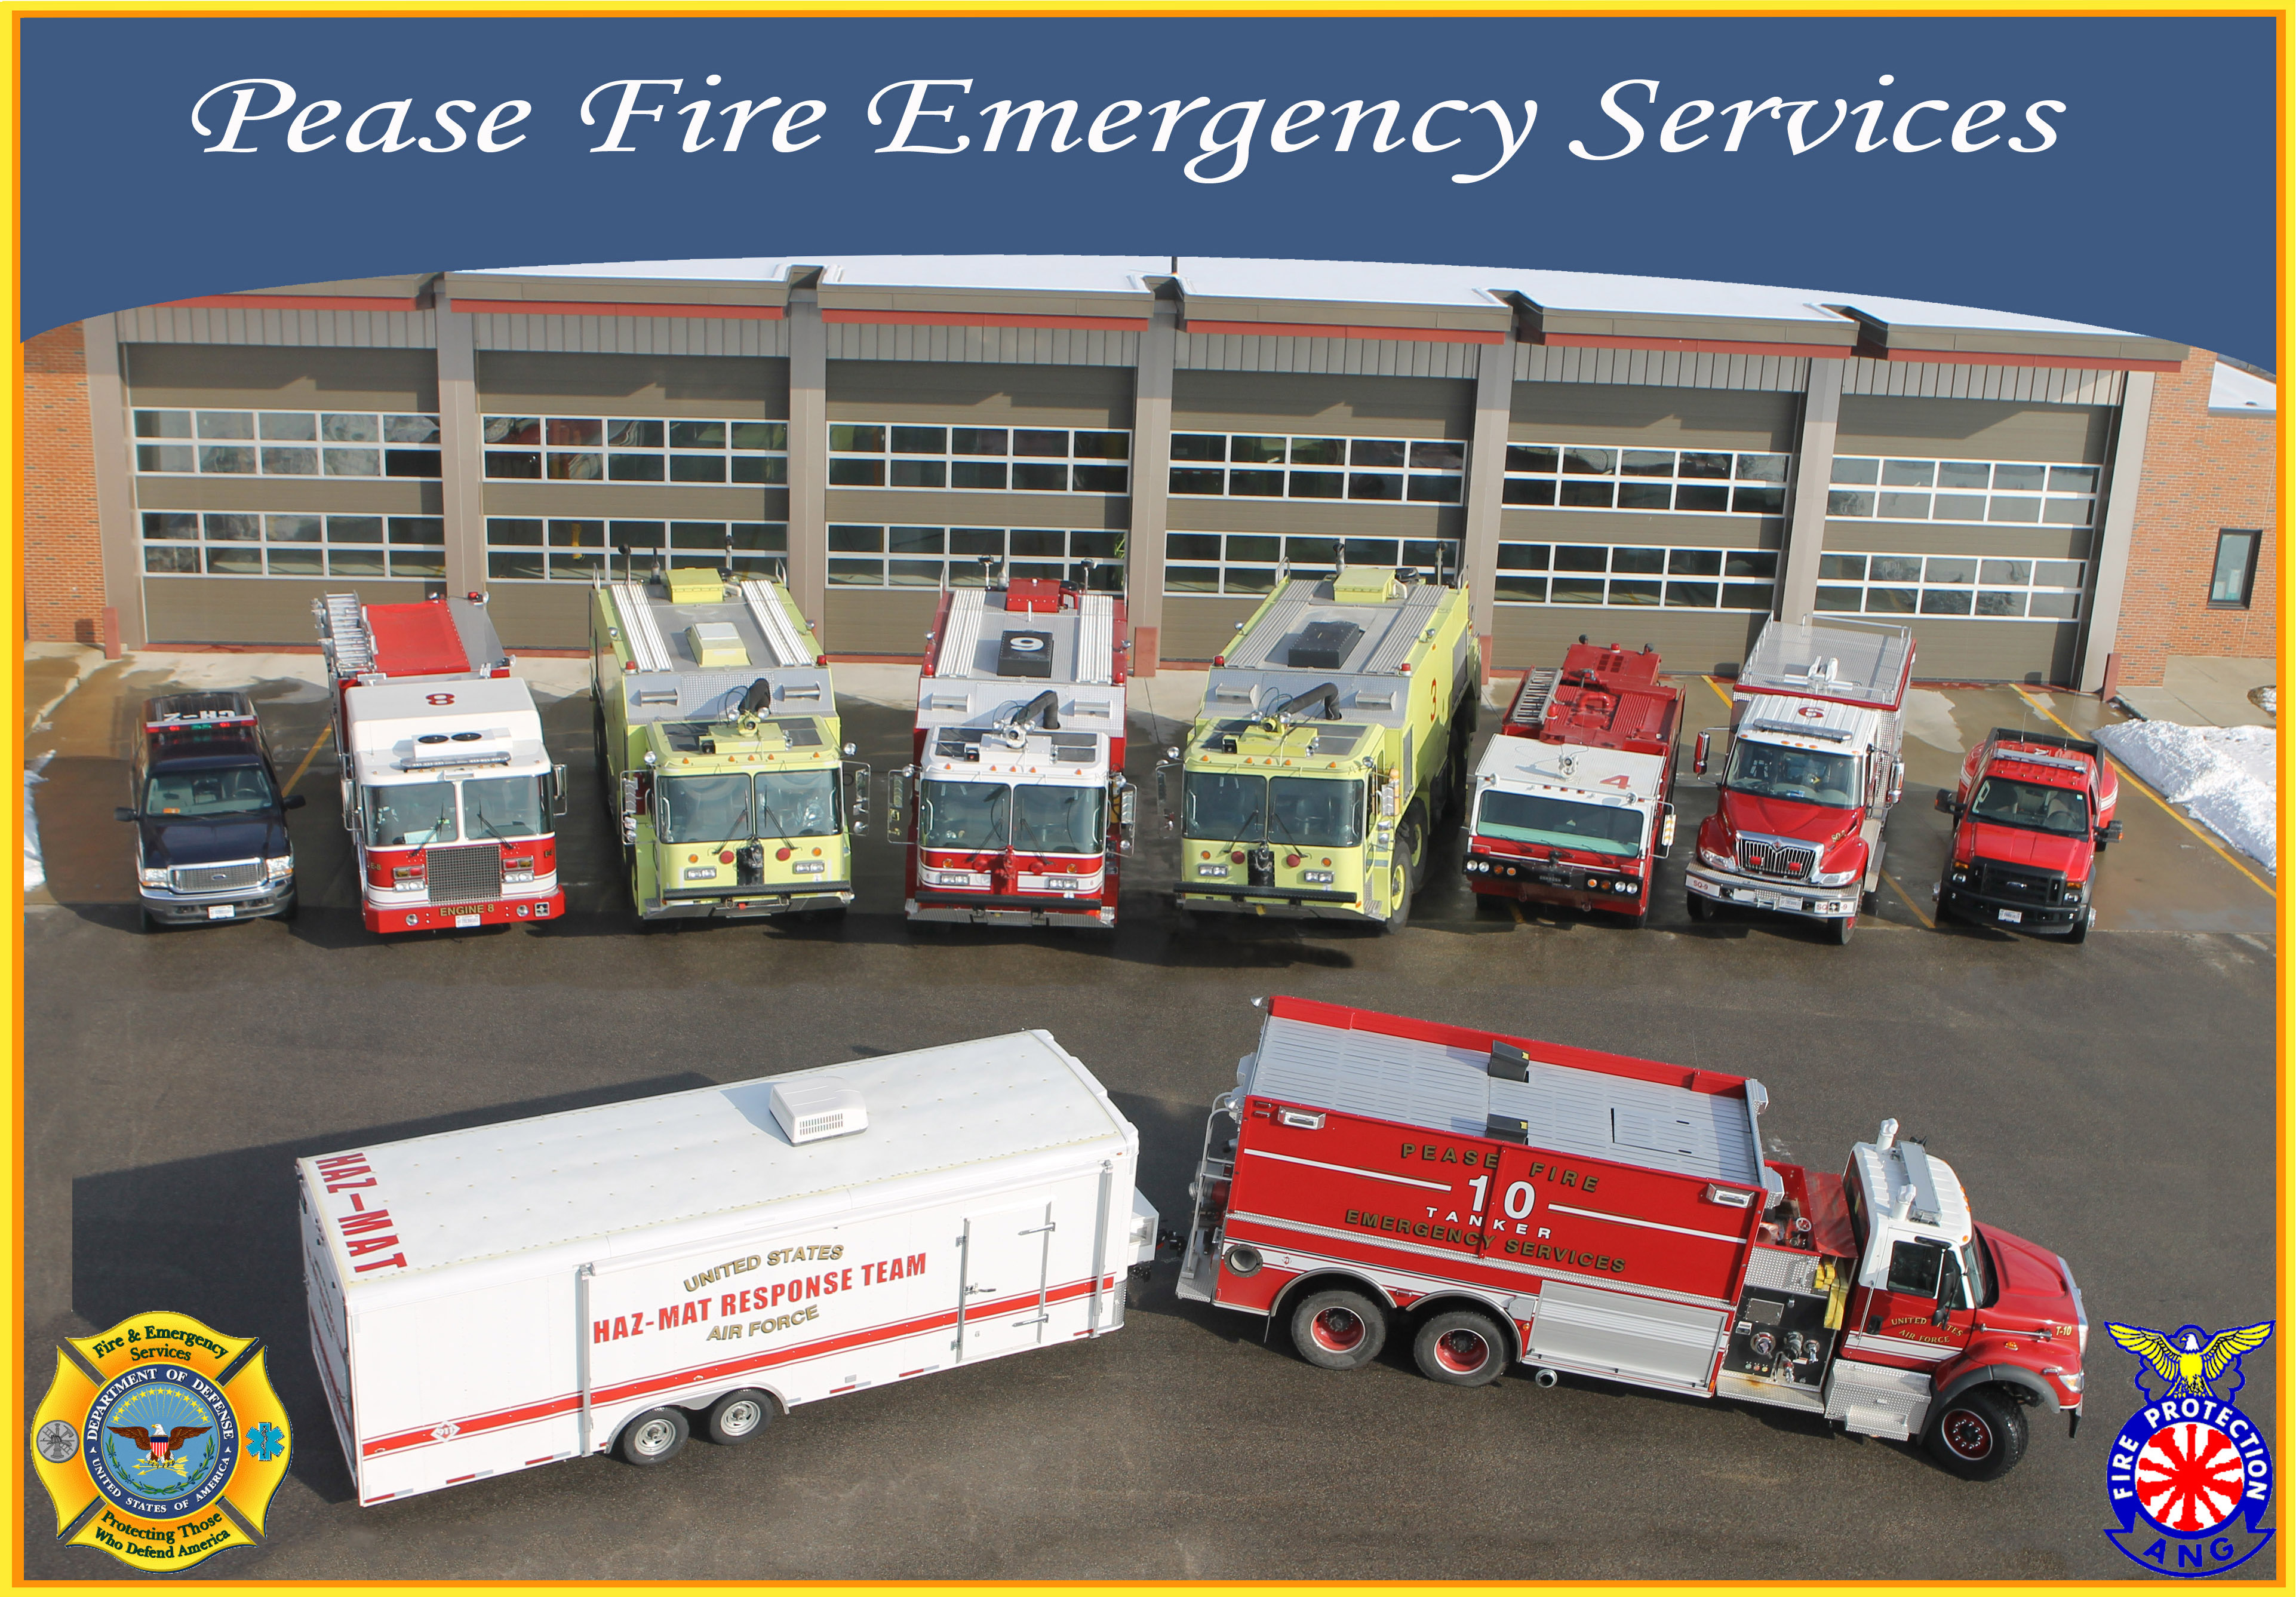 Aerial photo of the Pease Fire Emergency Services firetrucks